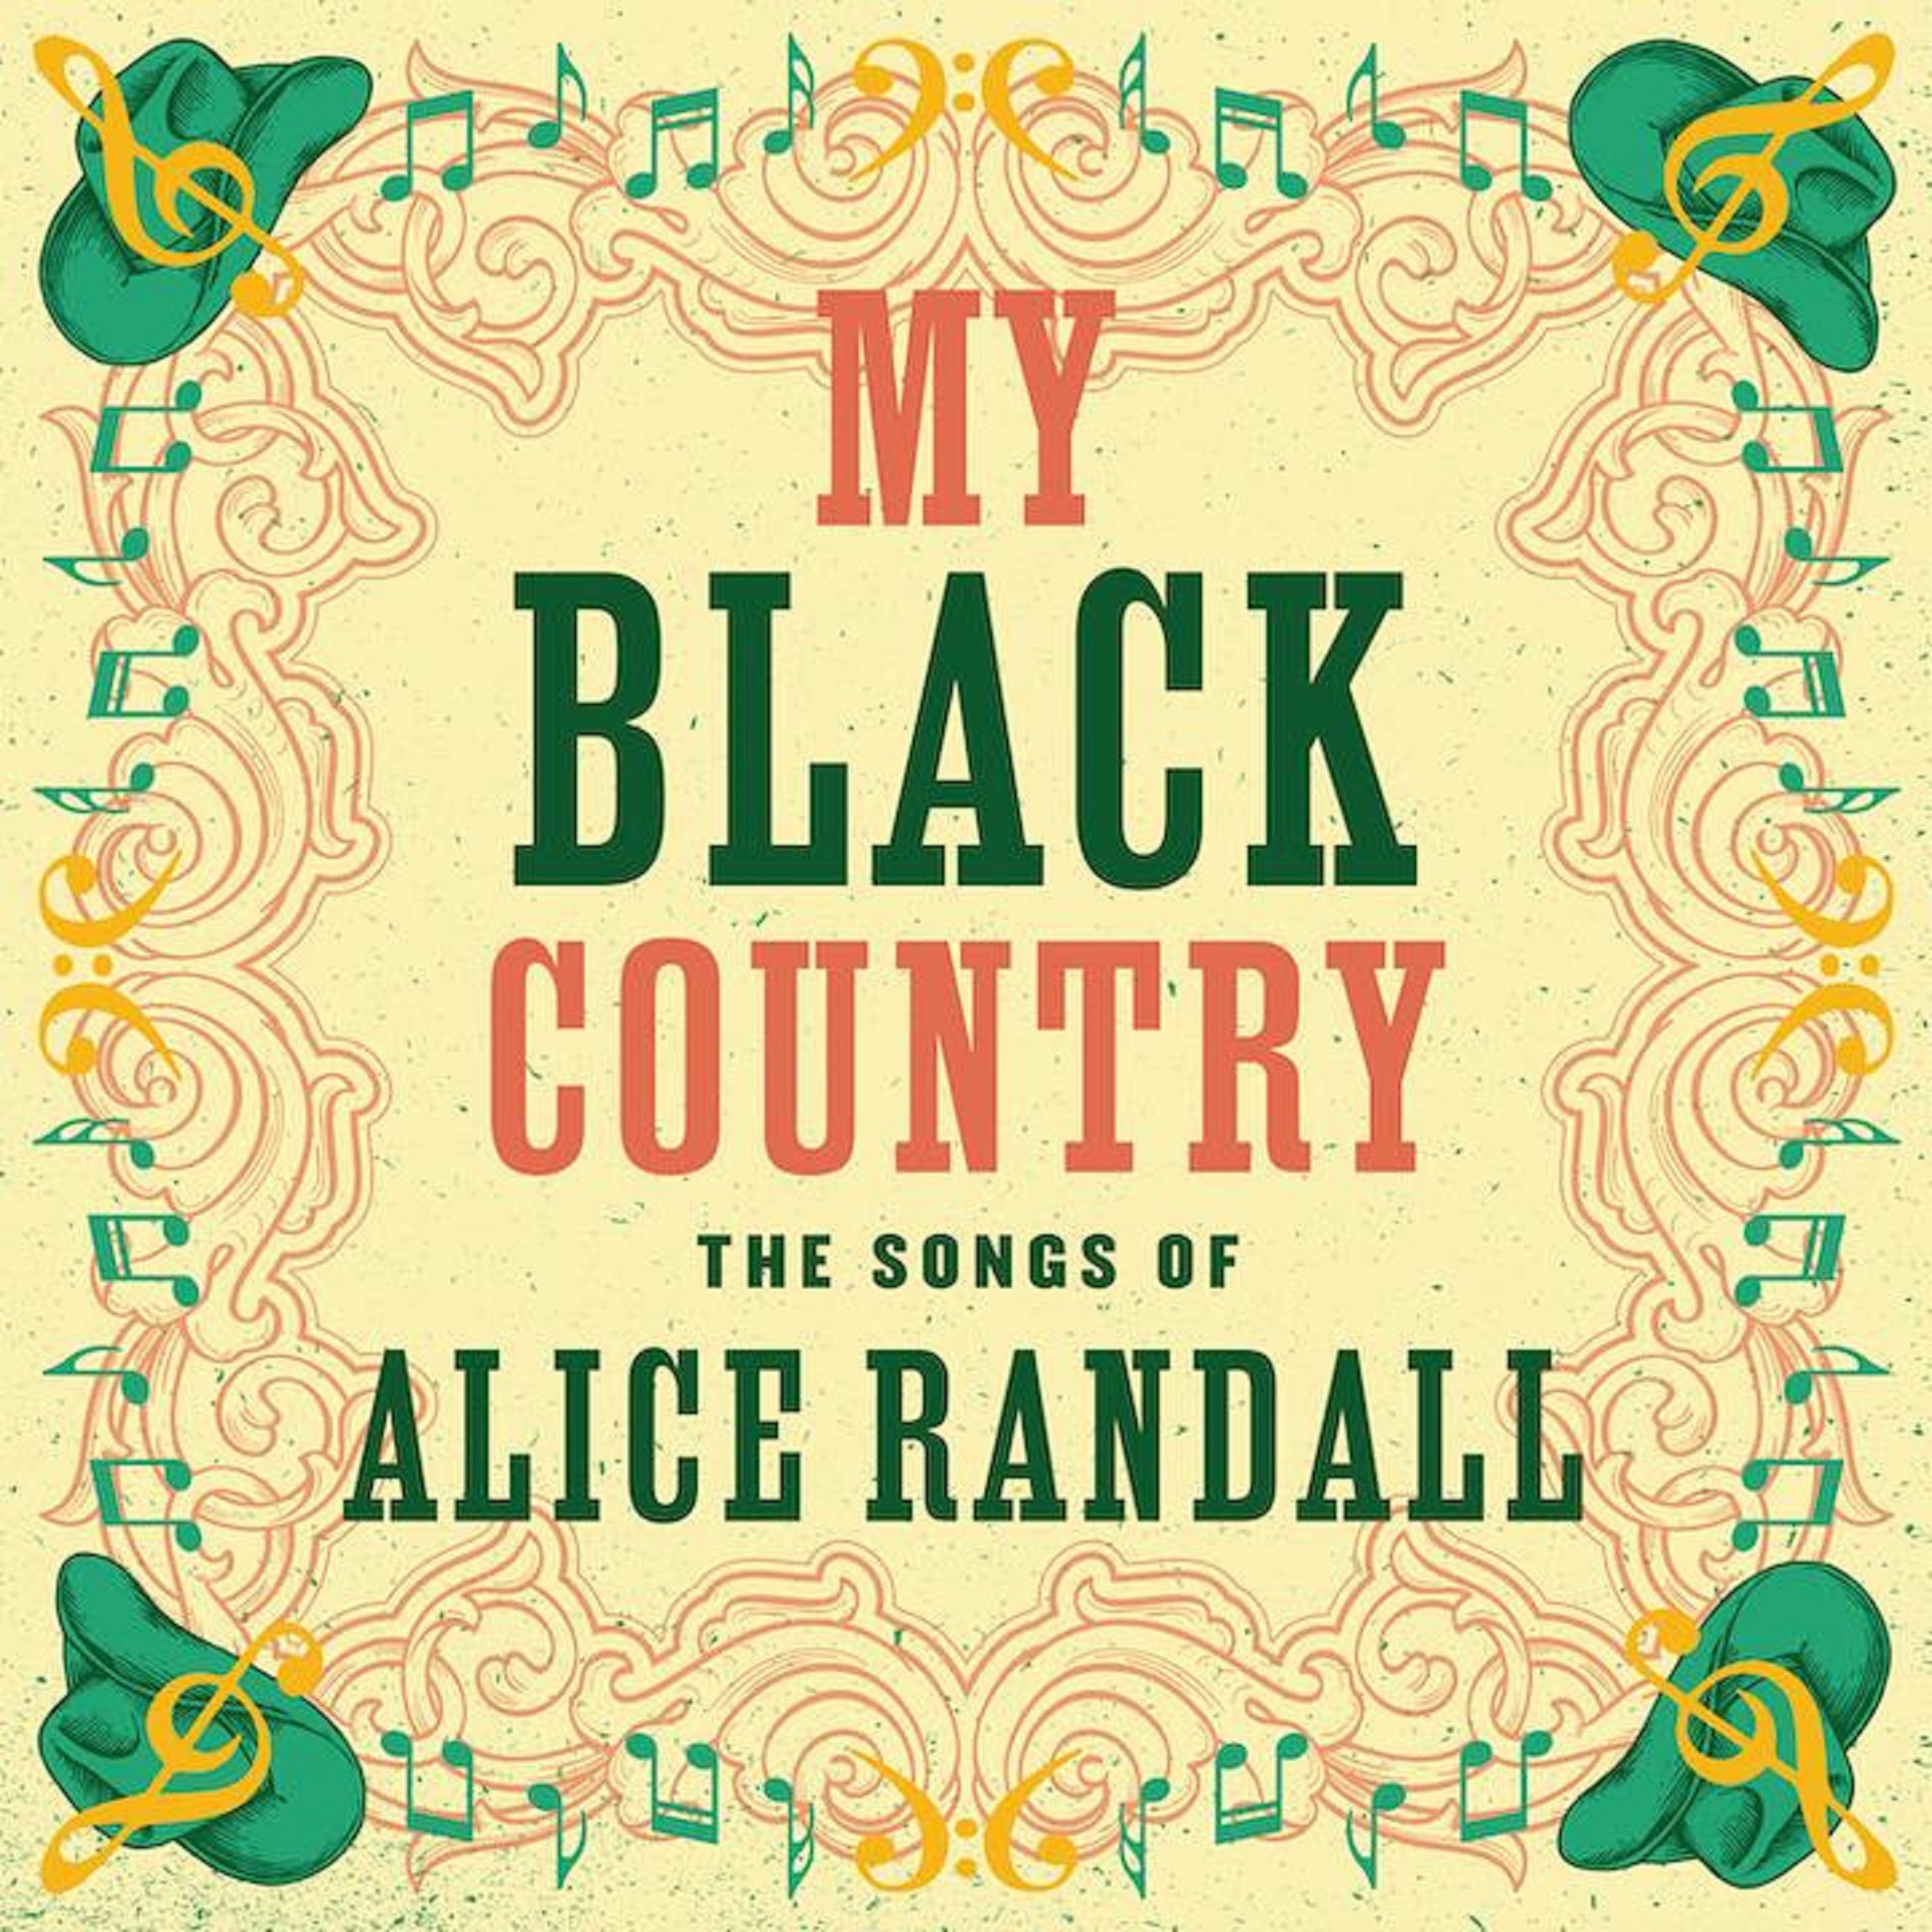 My Black Country: The Songs of Alice Randall Out April 12 on Oh Boy Records